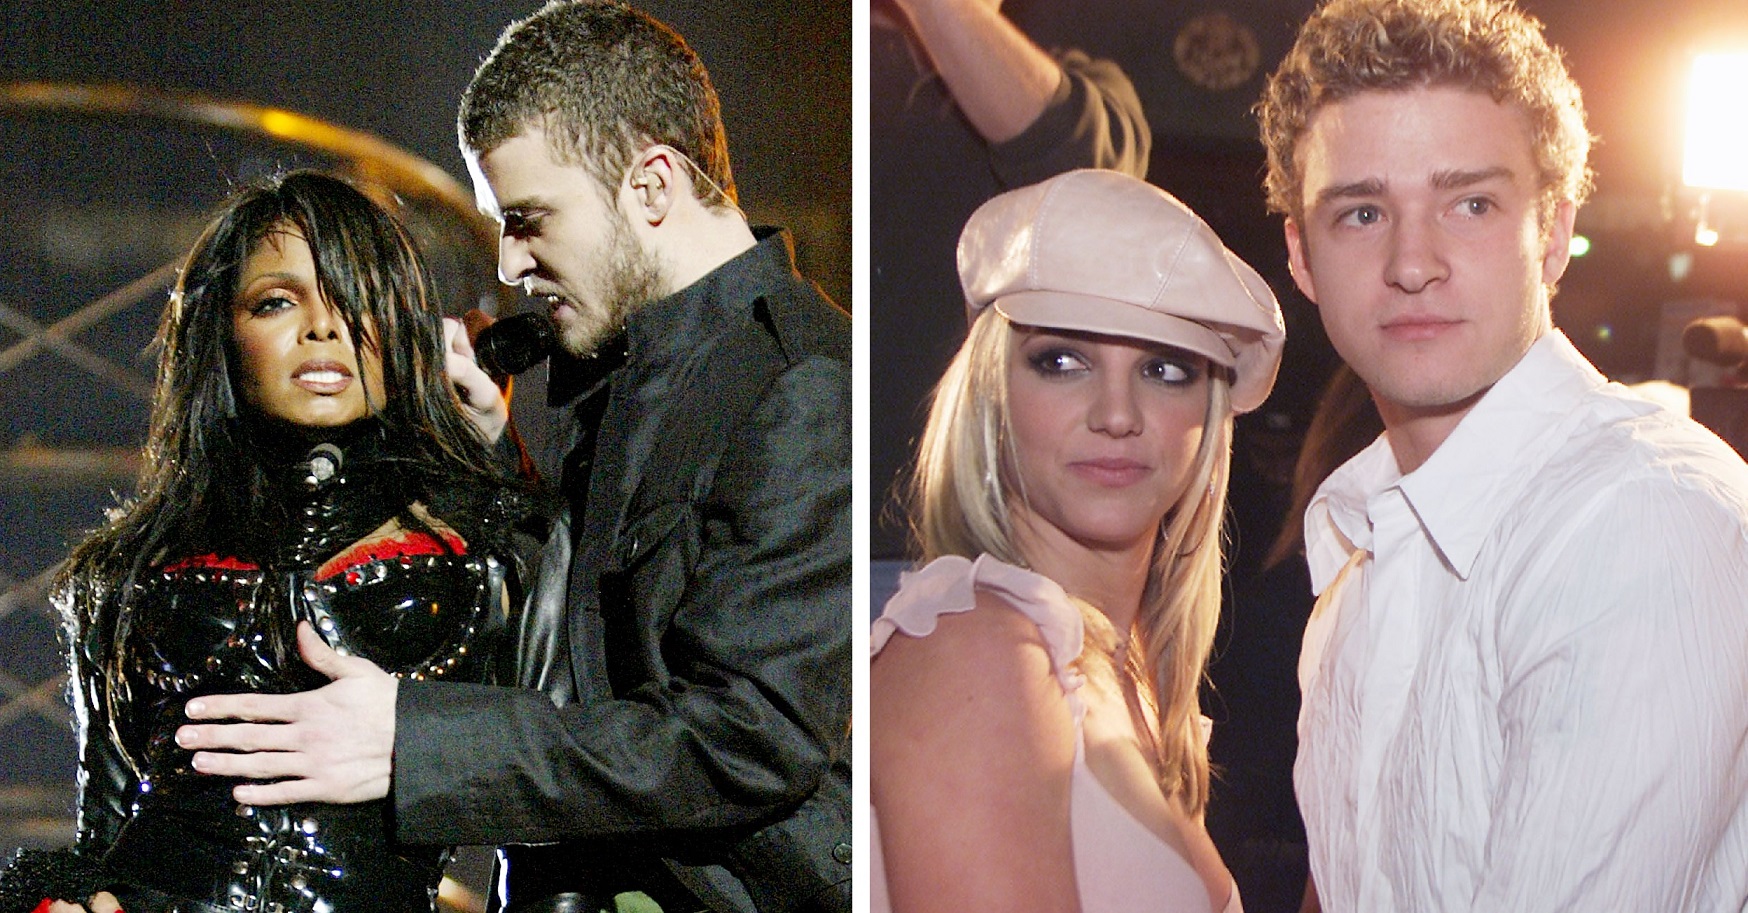 Justin Timberlake FINALLY Issues An Apology To Britney Spears & Janet Jackson, But Is That Enough?